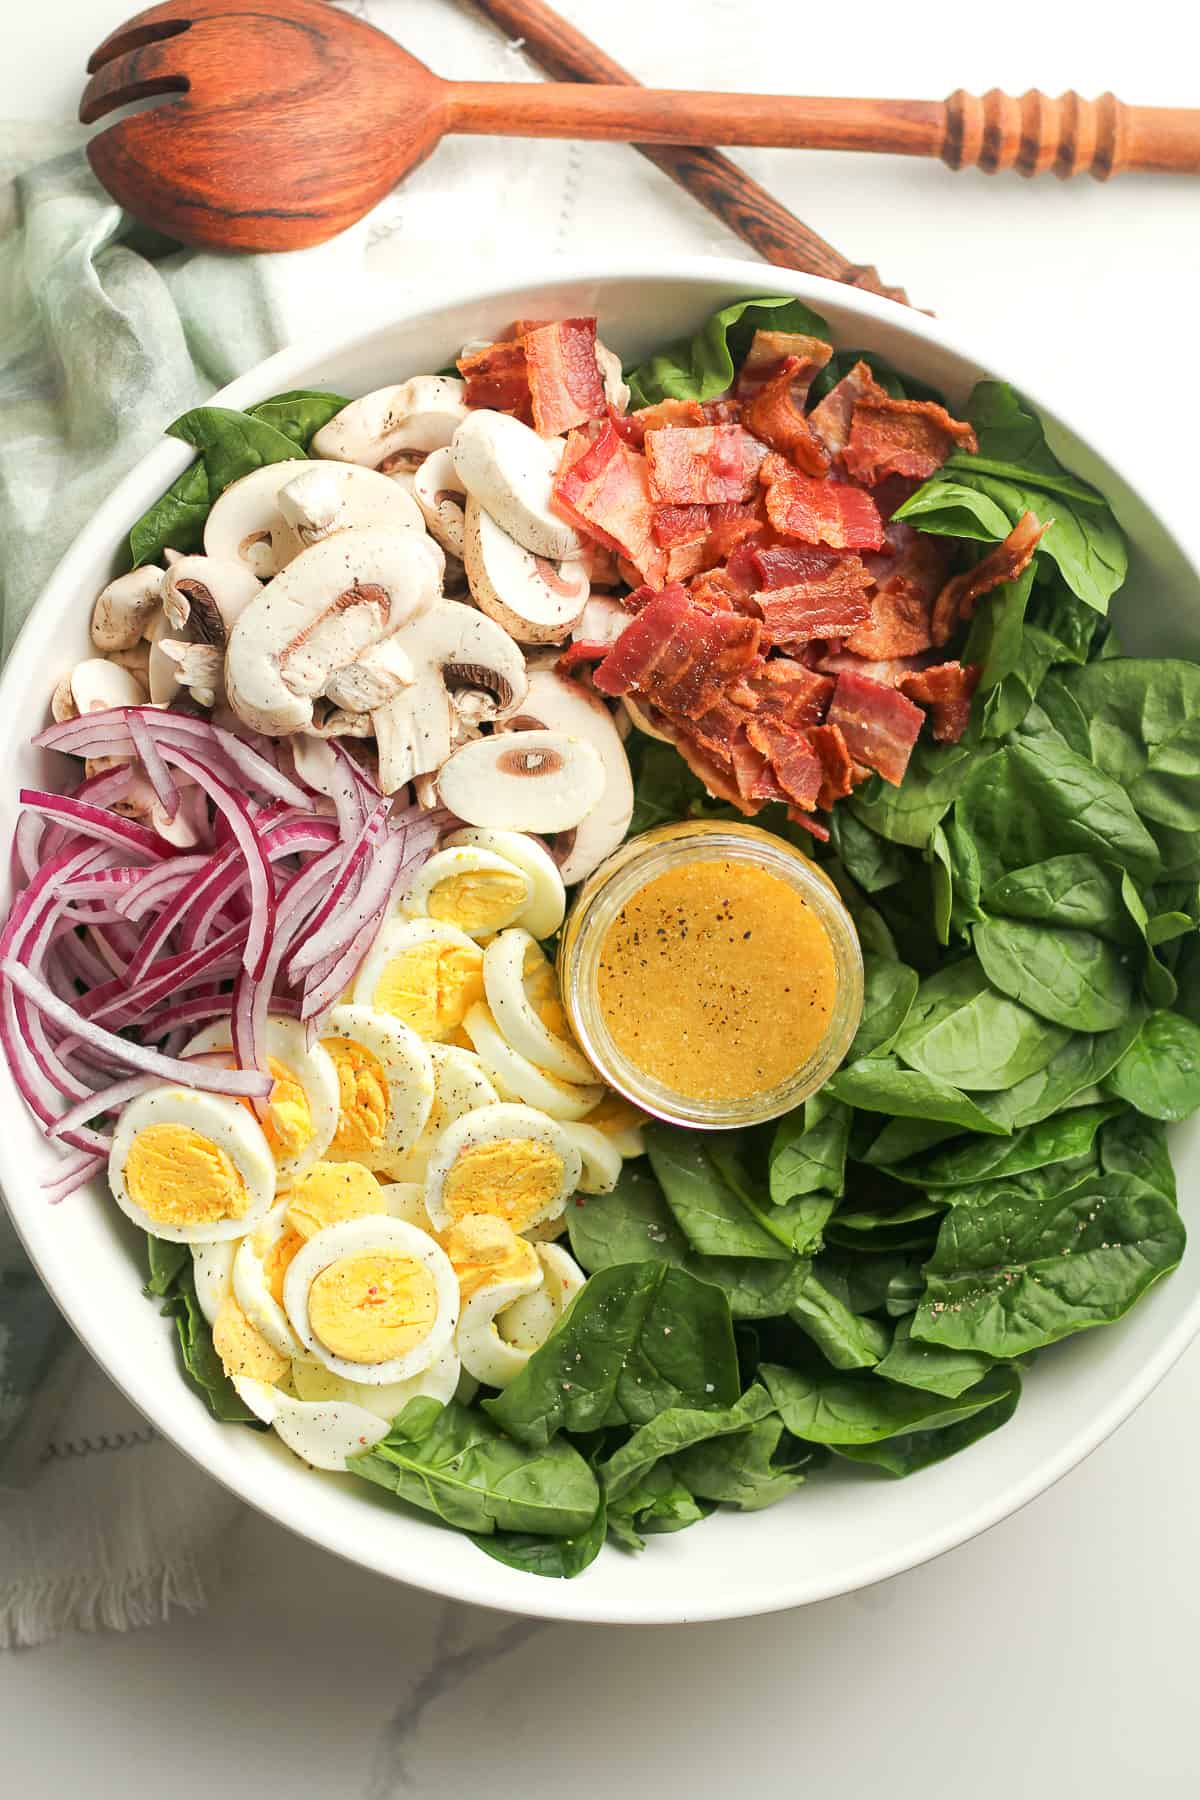 Spinach Salad with Honey Dijon Dressing